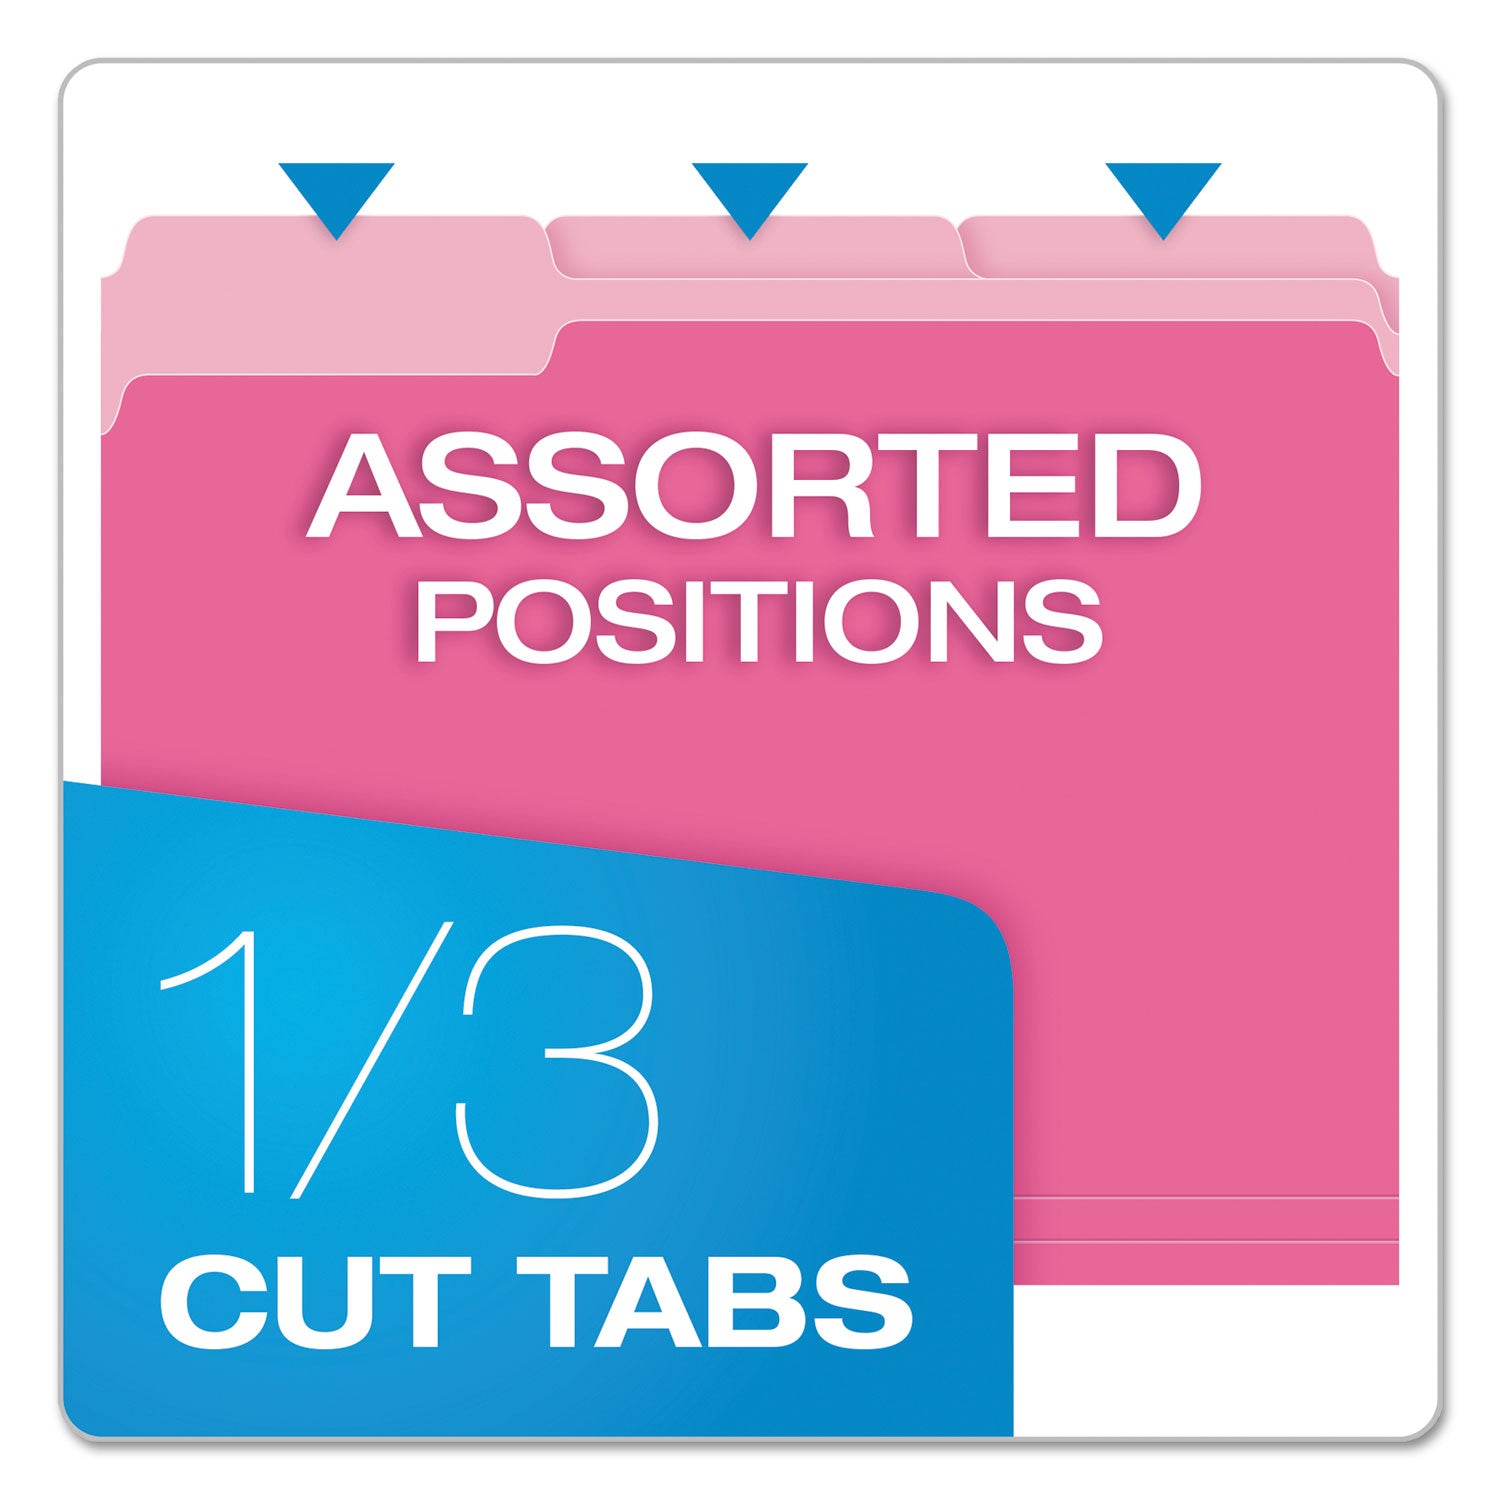 Colored File Folders, 1/3-Cut Tabs: Assorted, Letter Size, Pink/Light Pink, 100/Box - 